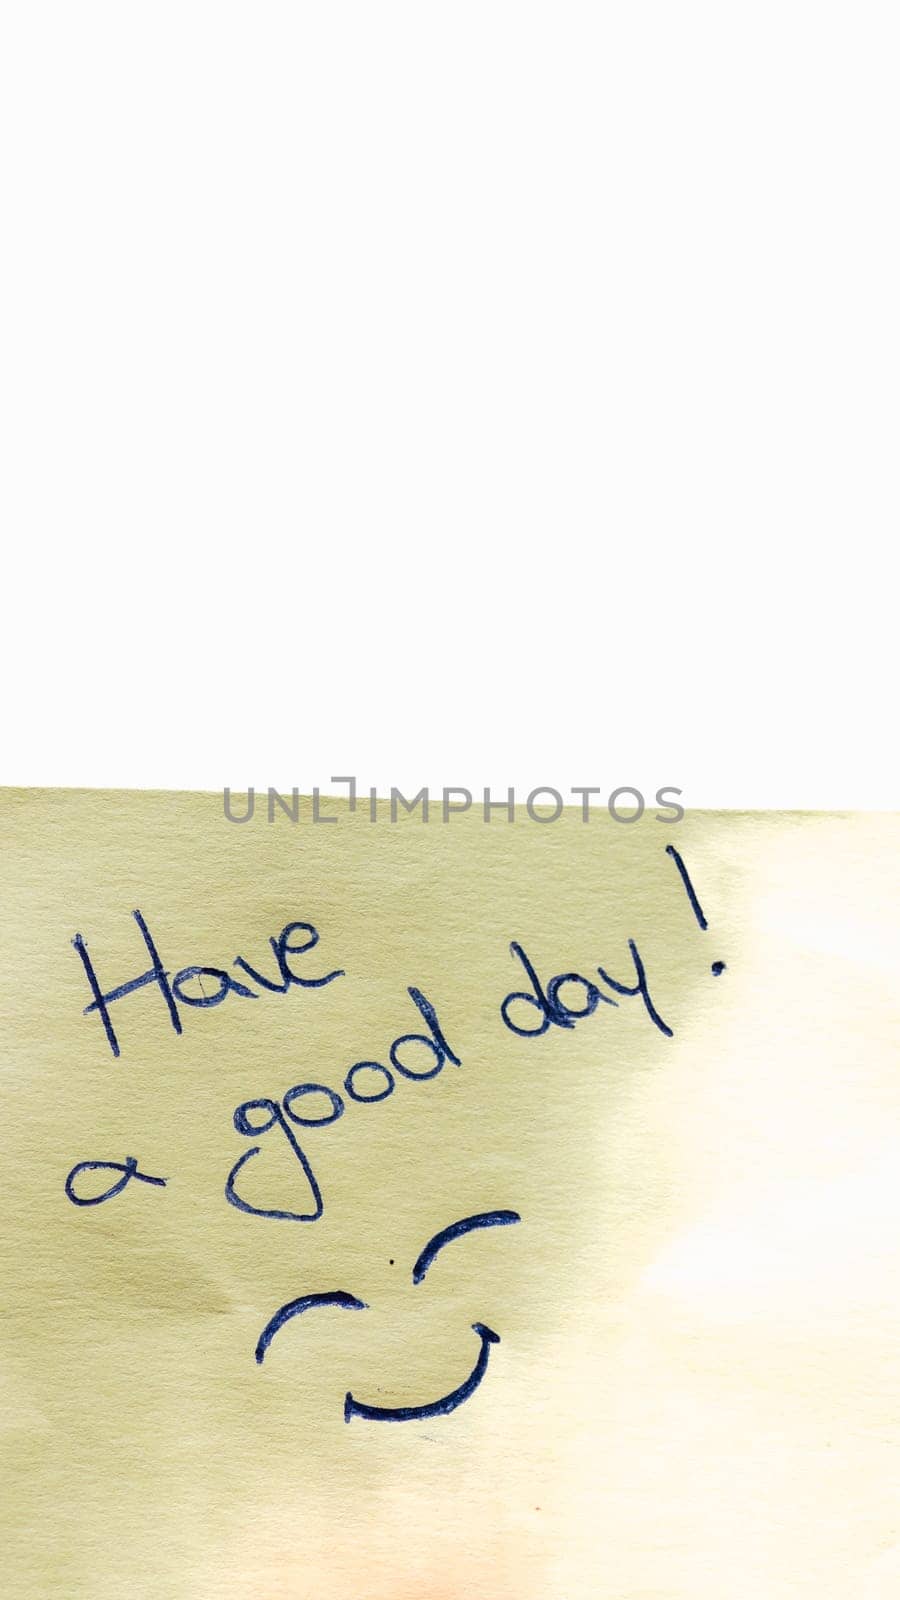 Have a good day handwriting text close up isolated on yellow paper with copy space. by vladispas